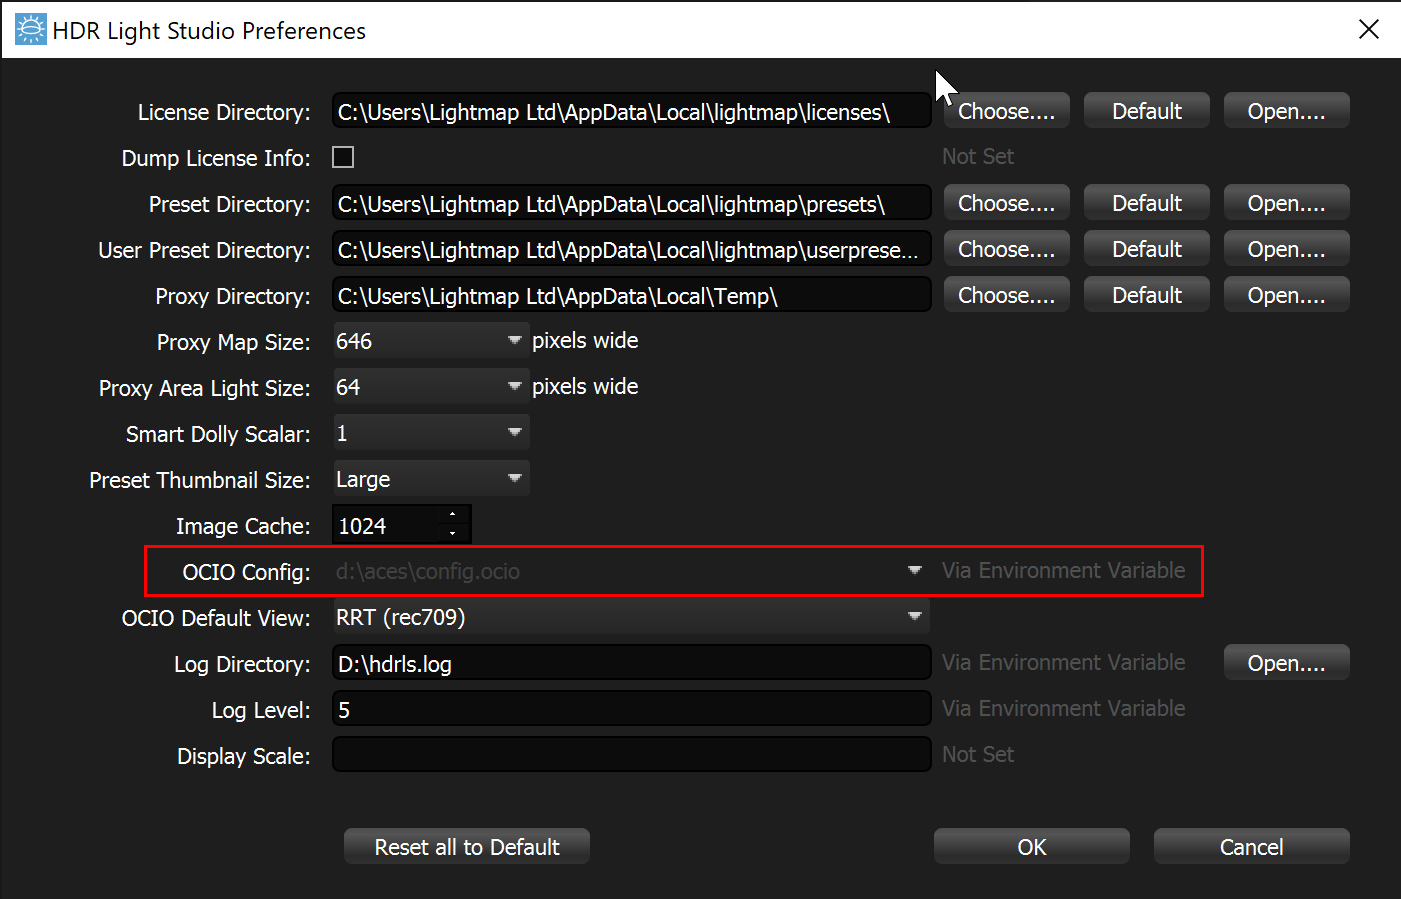 Panel shows that OCIO Config is set with Environment Variable